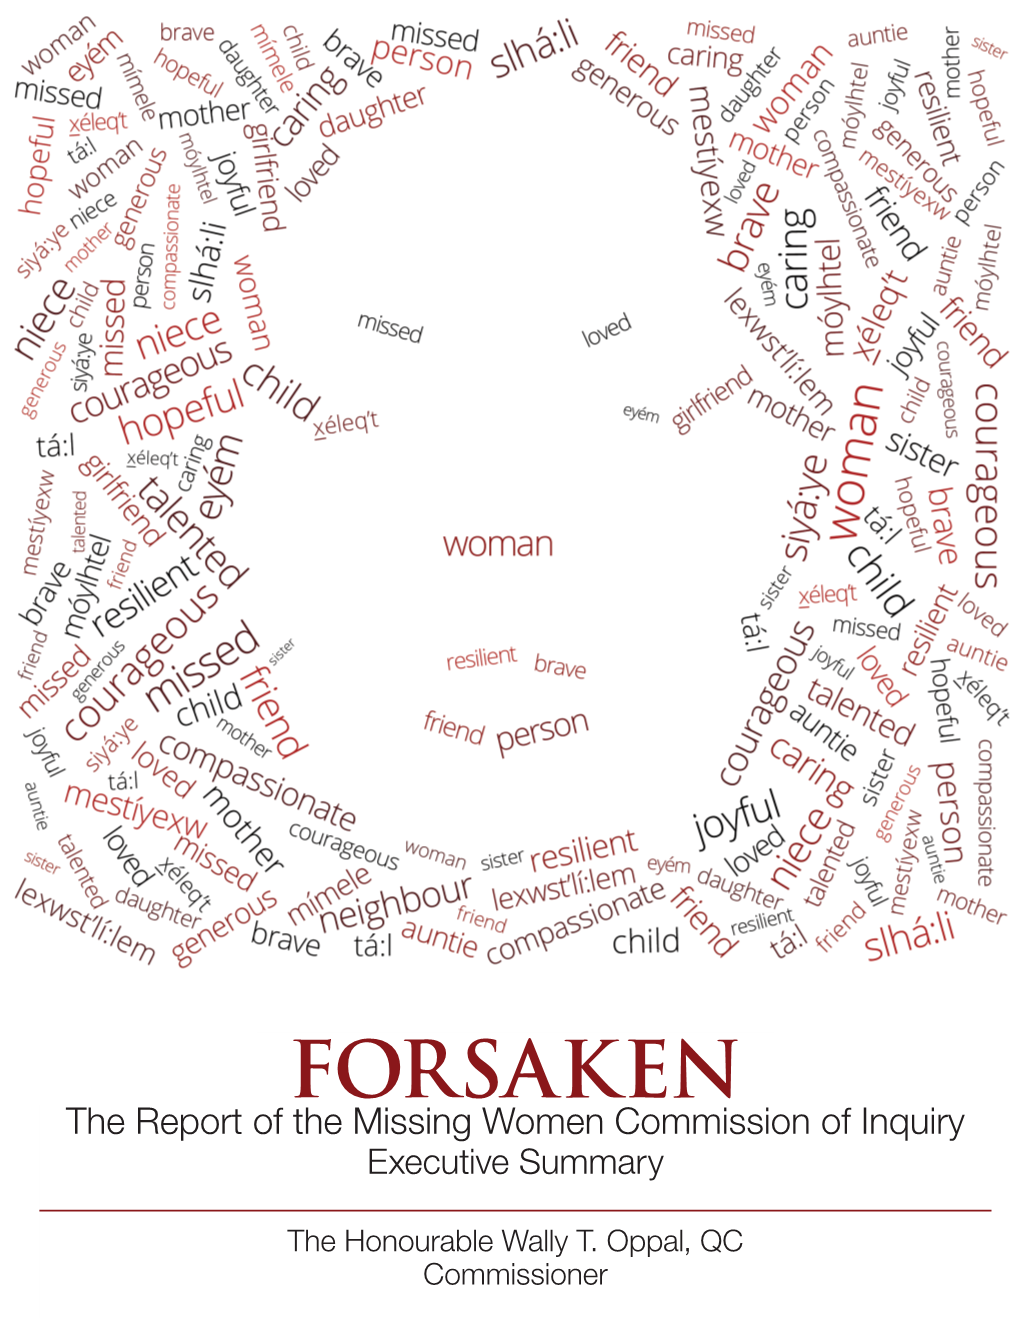 Forsaken: the Report of the Missing Women Commission of Inquiry